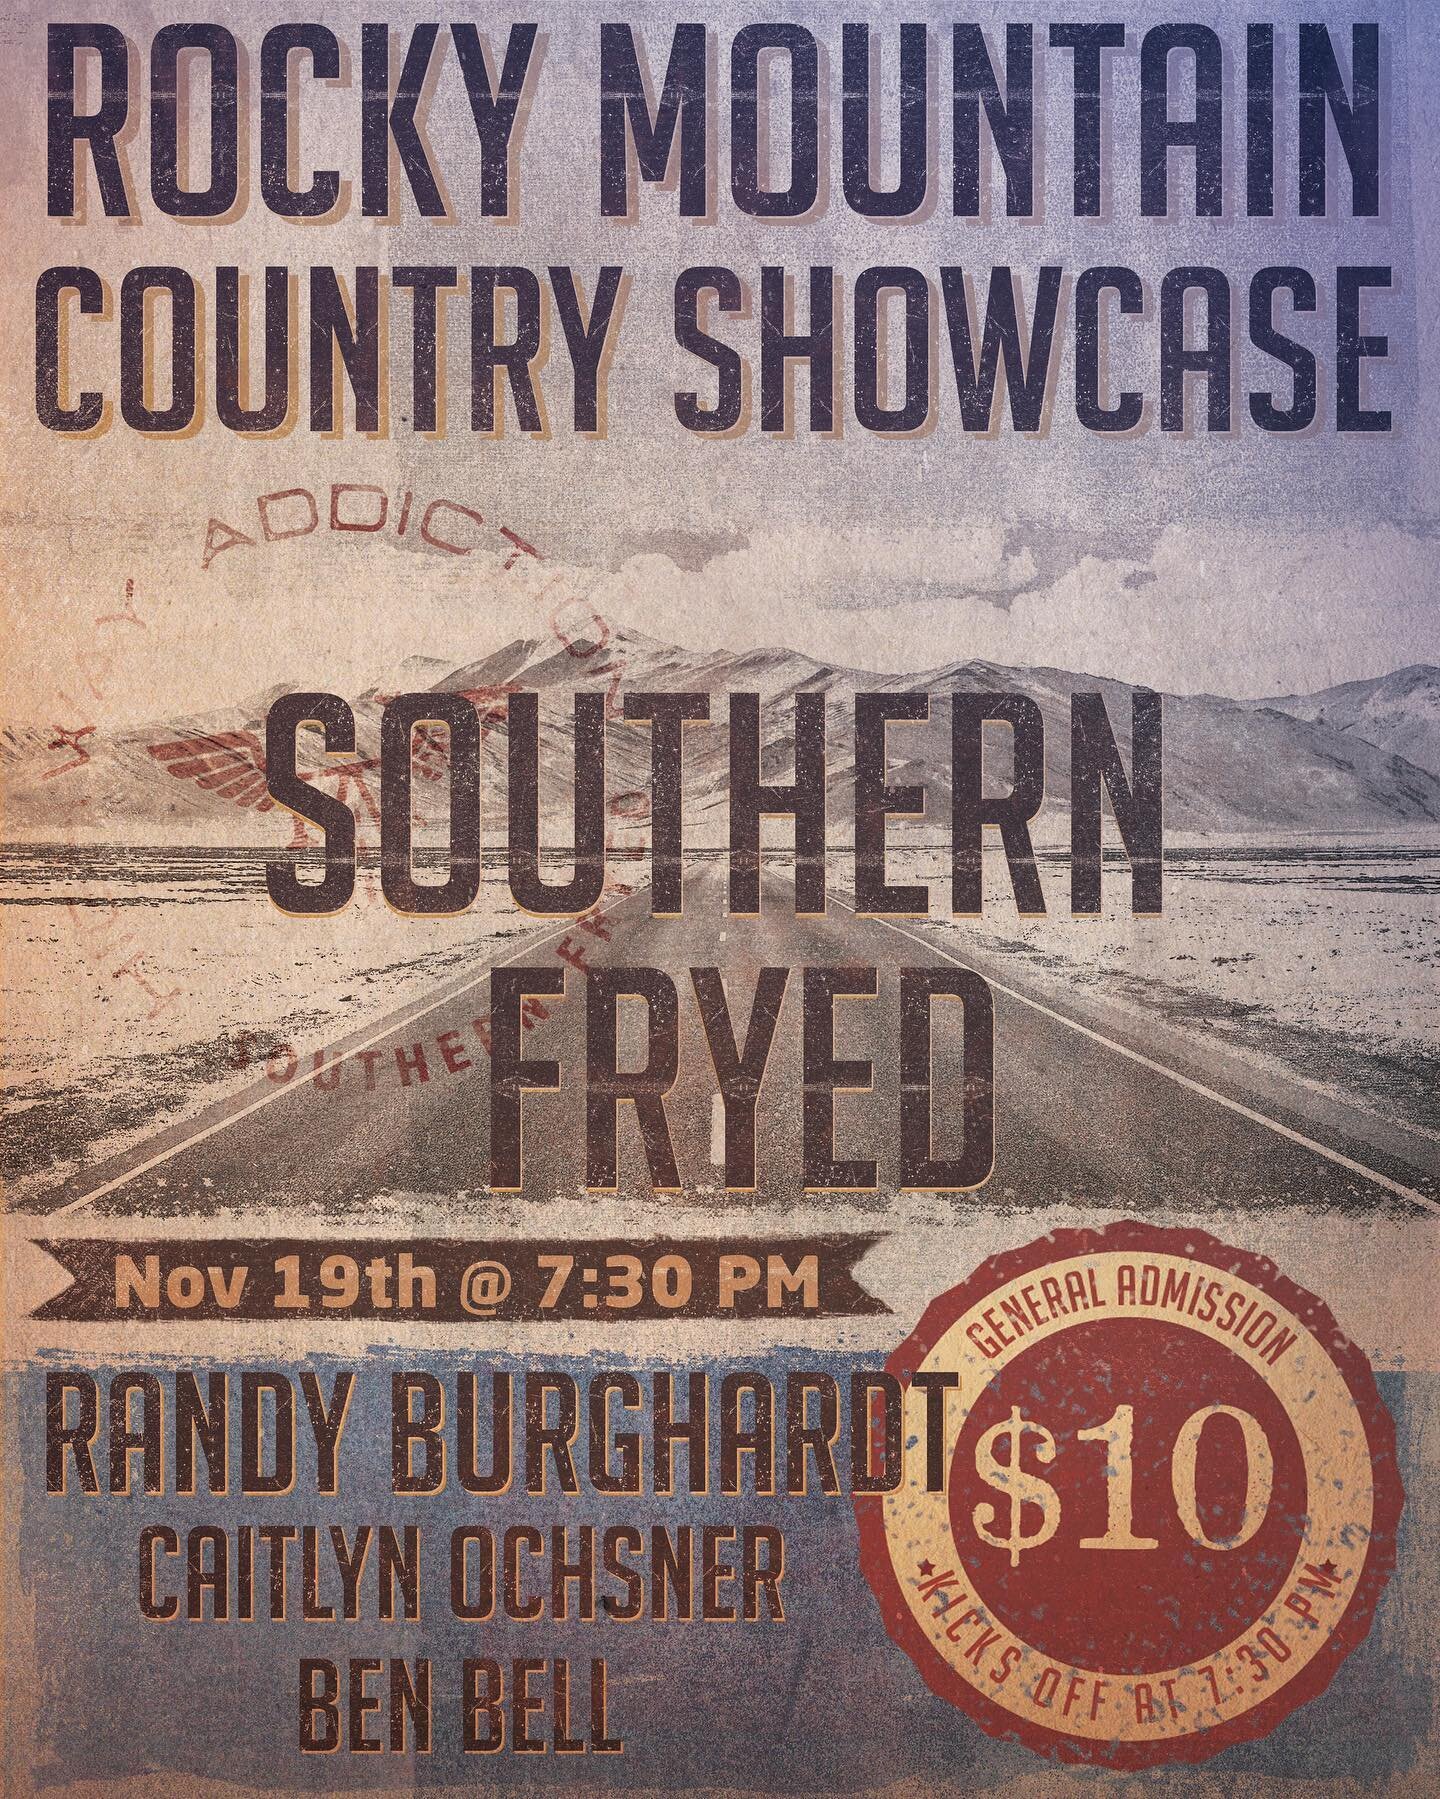 We&rsquo;ll be rockin Cheyenne at the @outlawsaloon19wyo with our friend @randyburghardt @caitlyn_ochsner_music and @benjaminebell for the Rocky Mountain Country Showcase November 19! #livemusic #touring #rockymountaincountrymusic